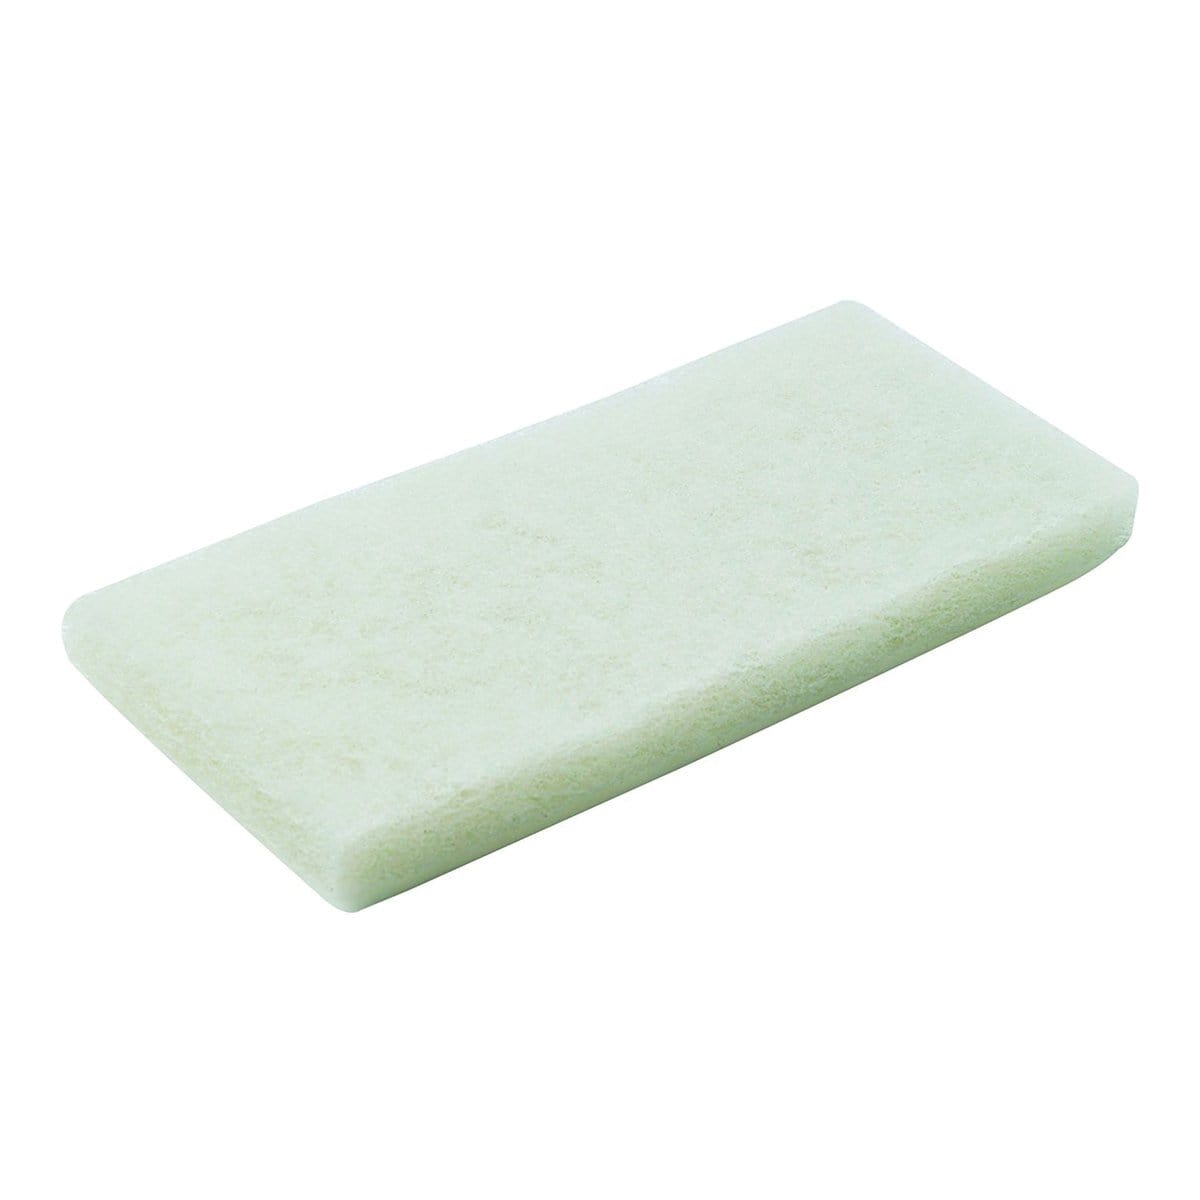 3M Marine Qualifies for Free Shipping 3M Doodlebug Cleaning Pad 4.6" 10" 5-pk White #8440